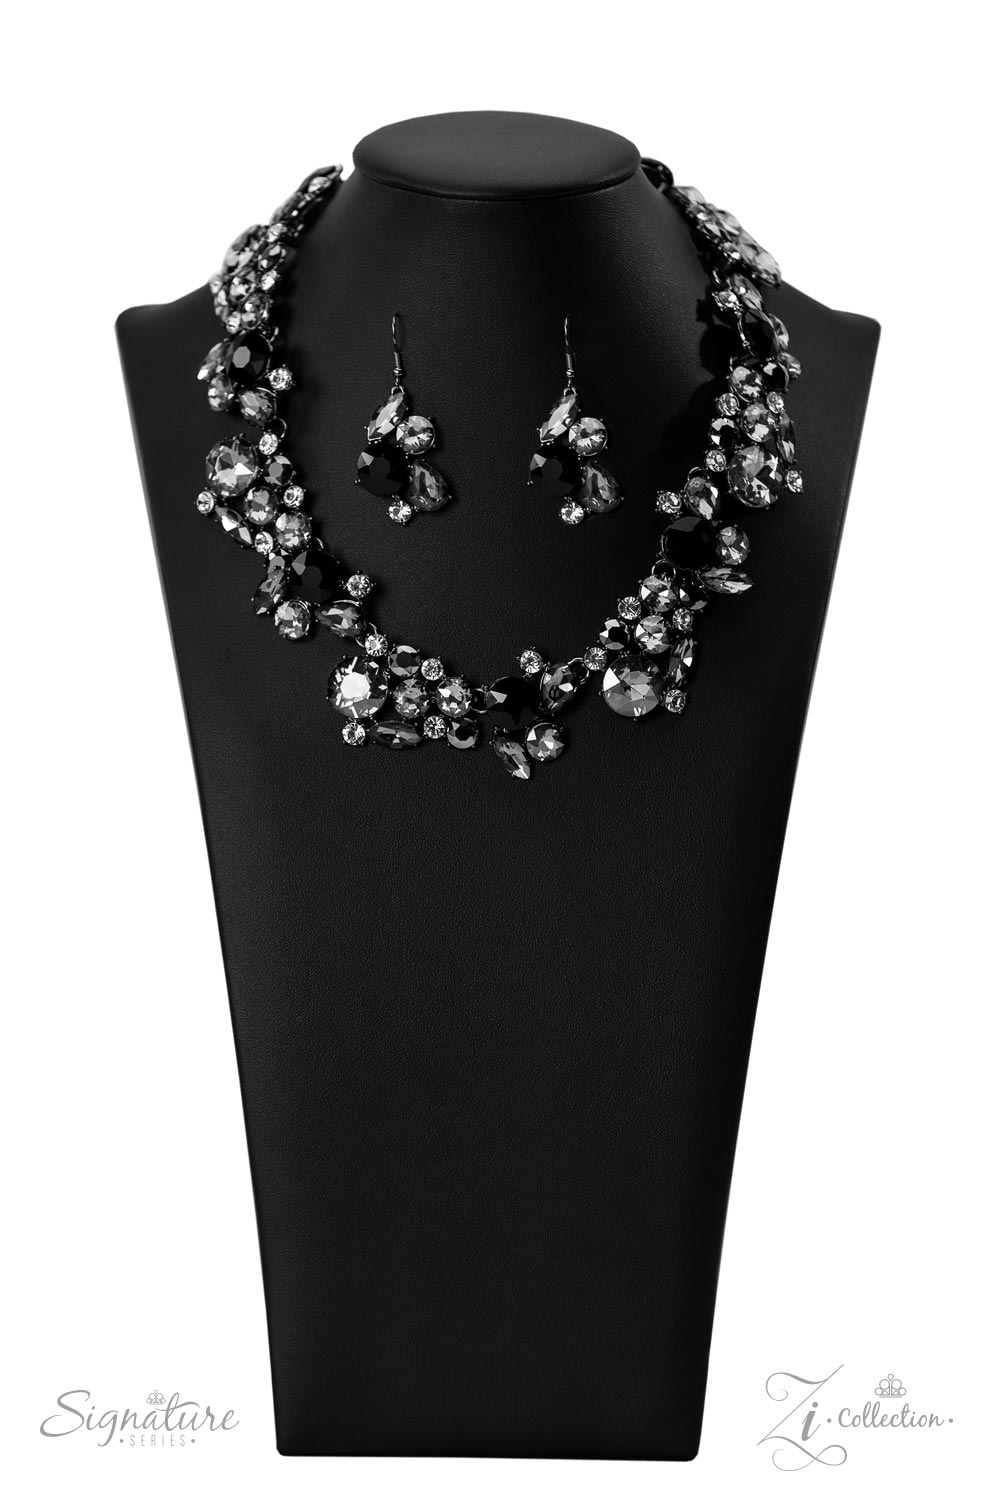 The Kim - Zi Collection Black Necklace